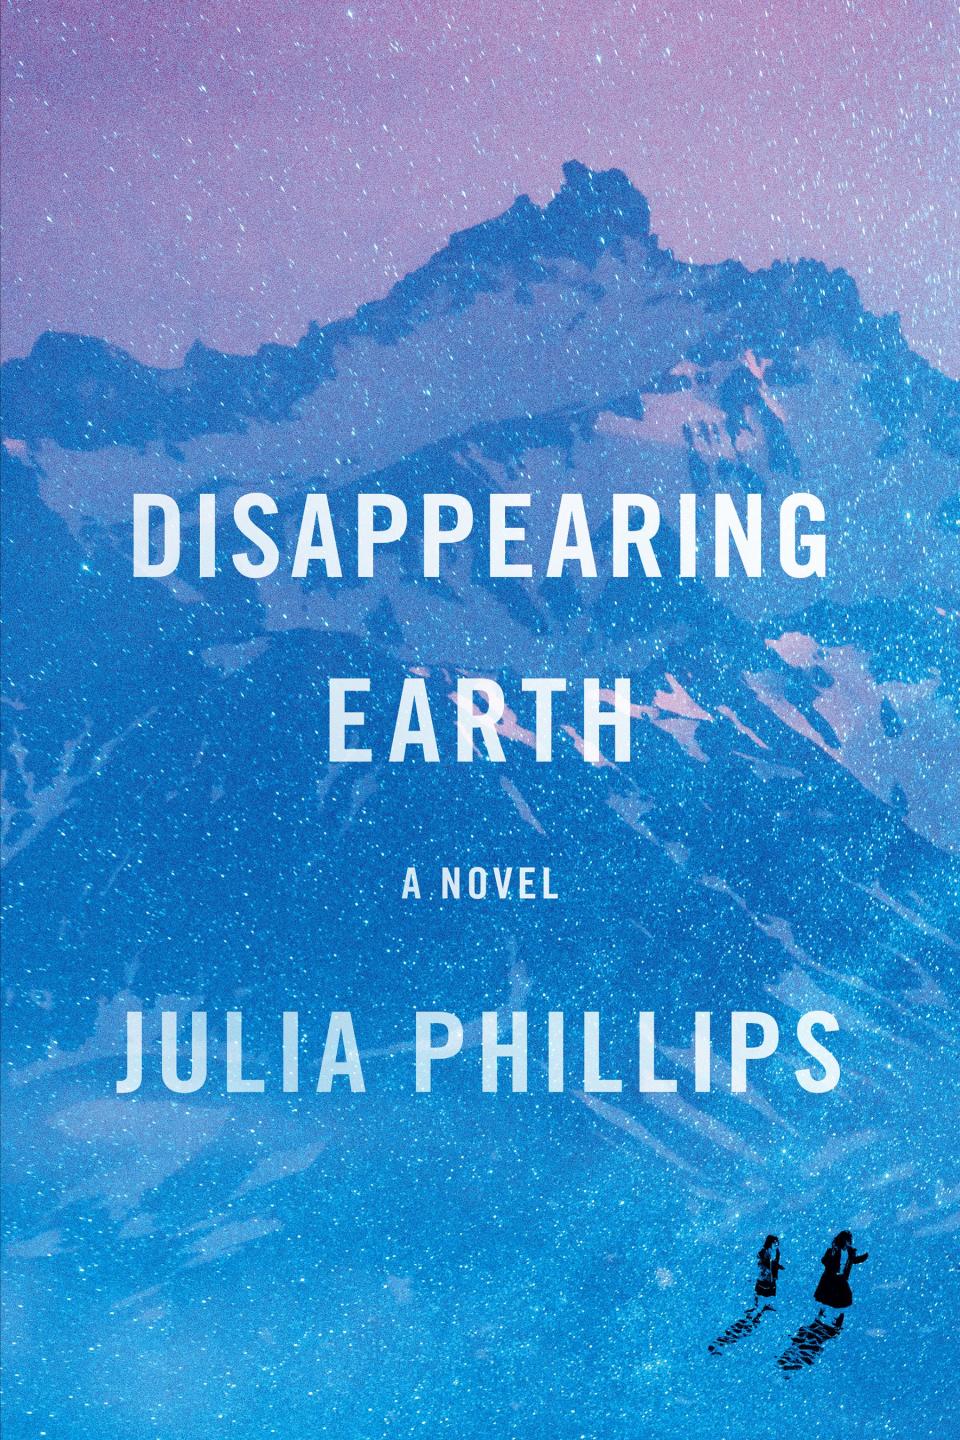 Disappearing Earth review: Julia Phillips' novel is stunning